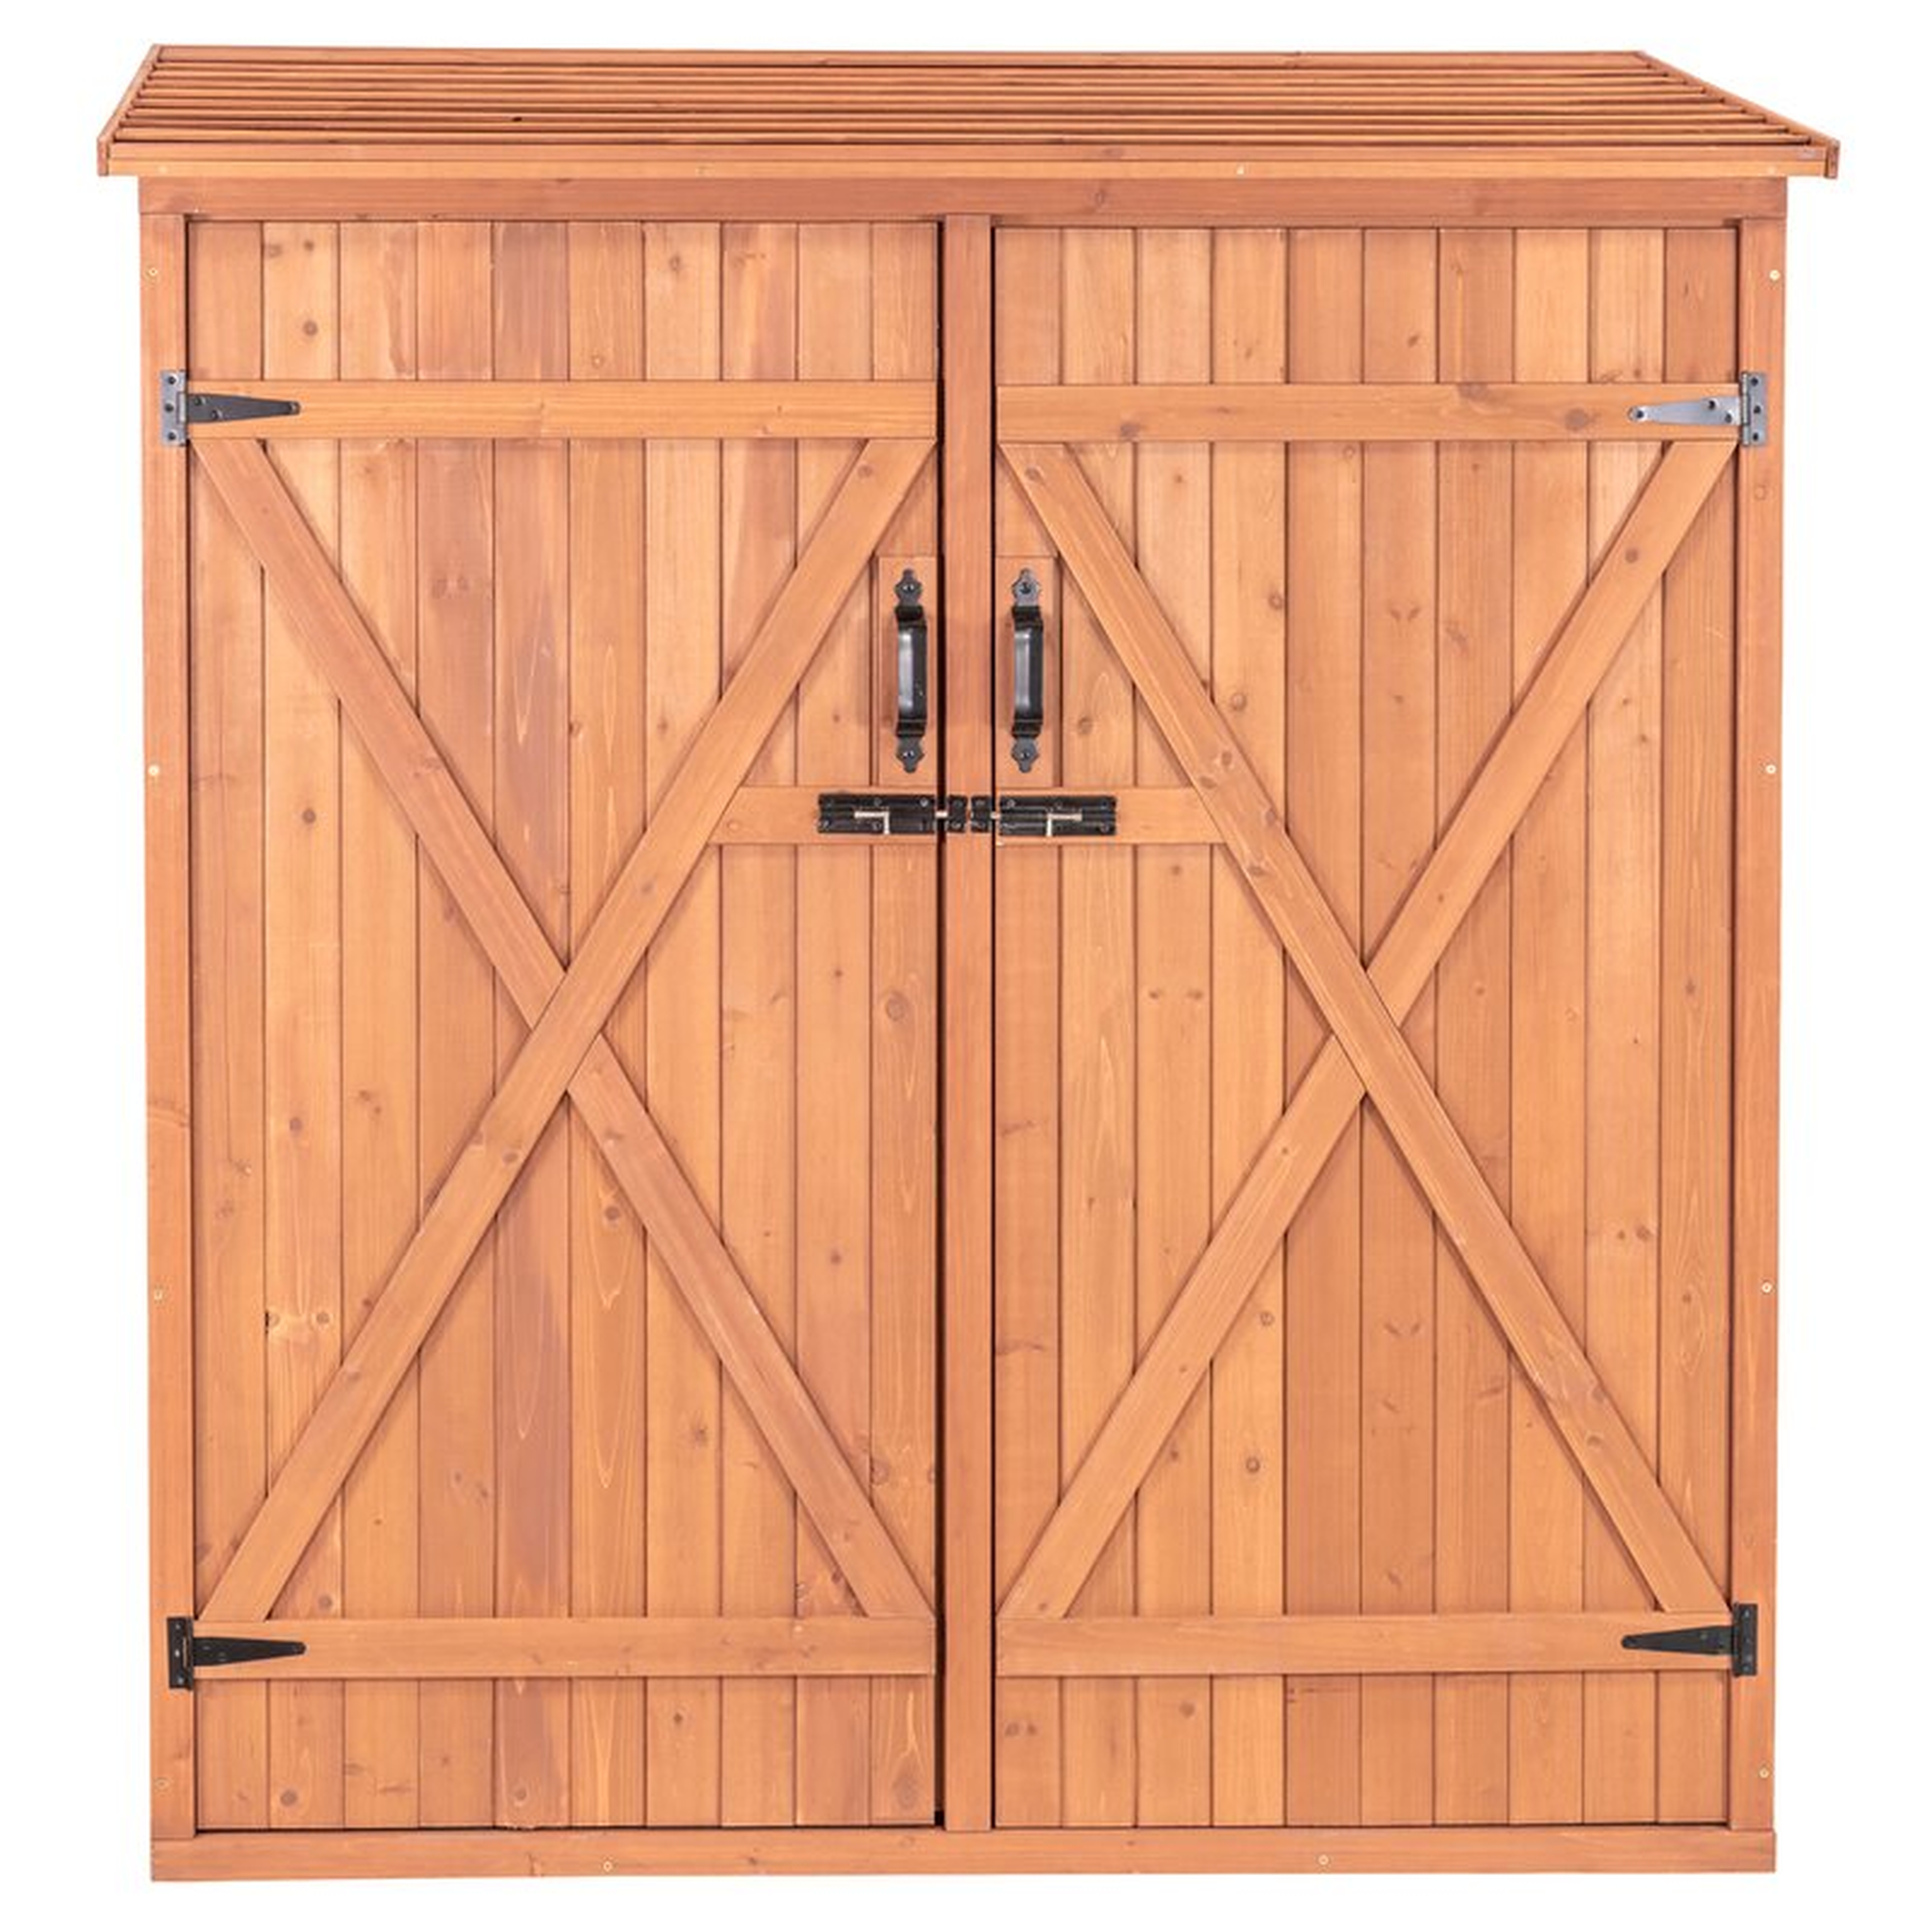 5 ft. W x 3 ft. D Solid Wood Lean-To Tool Shed - Wayfair